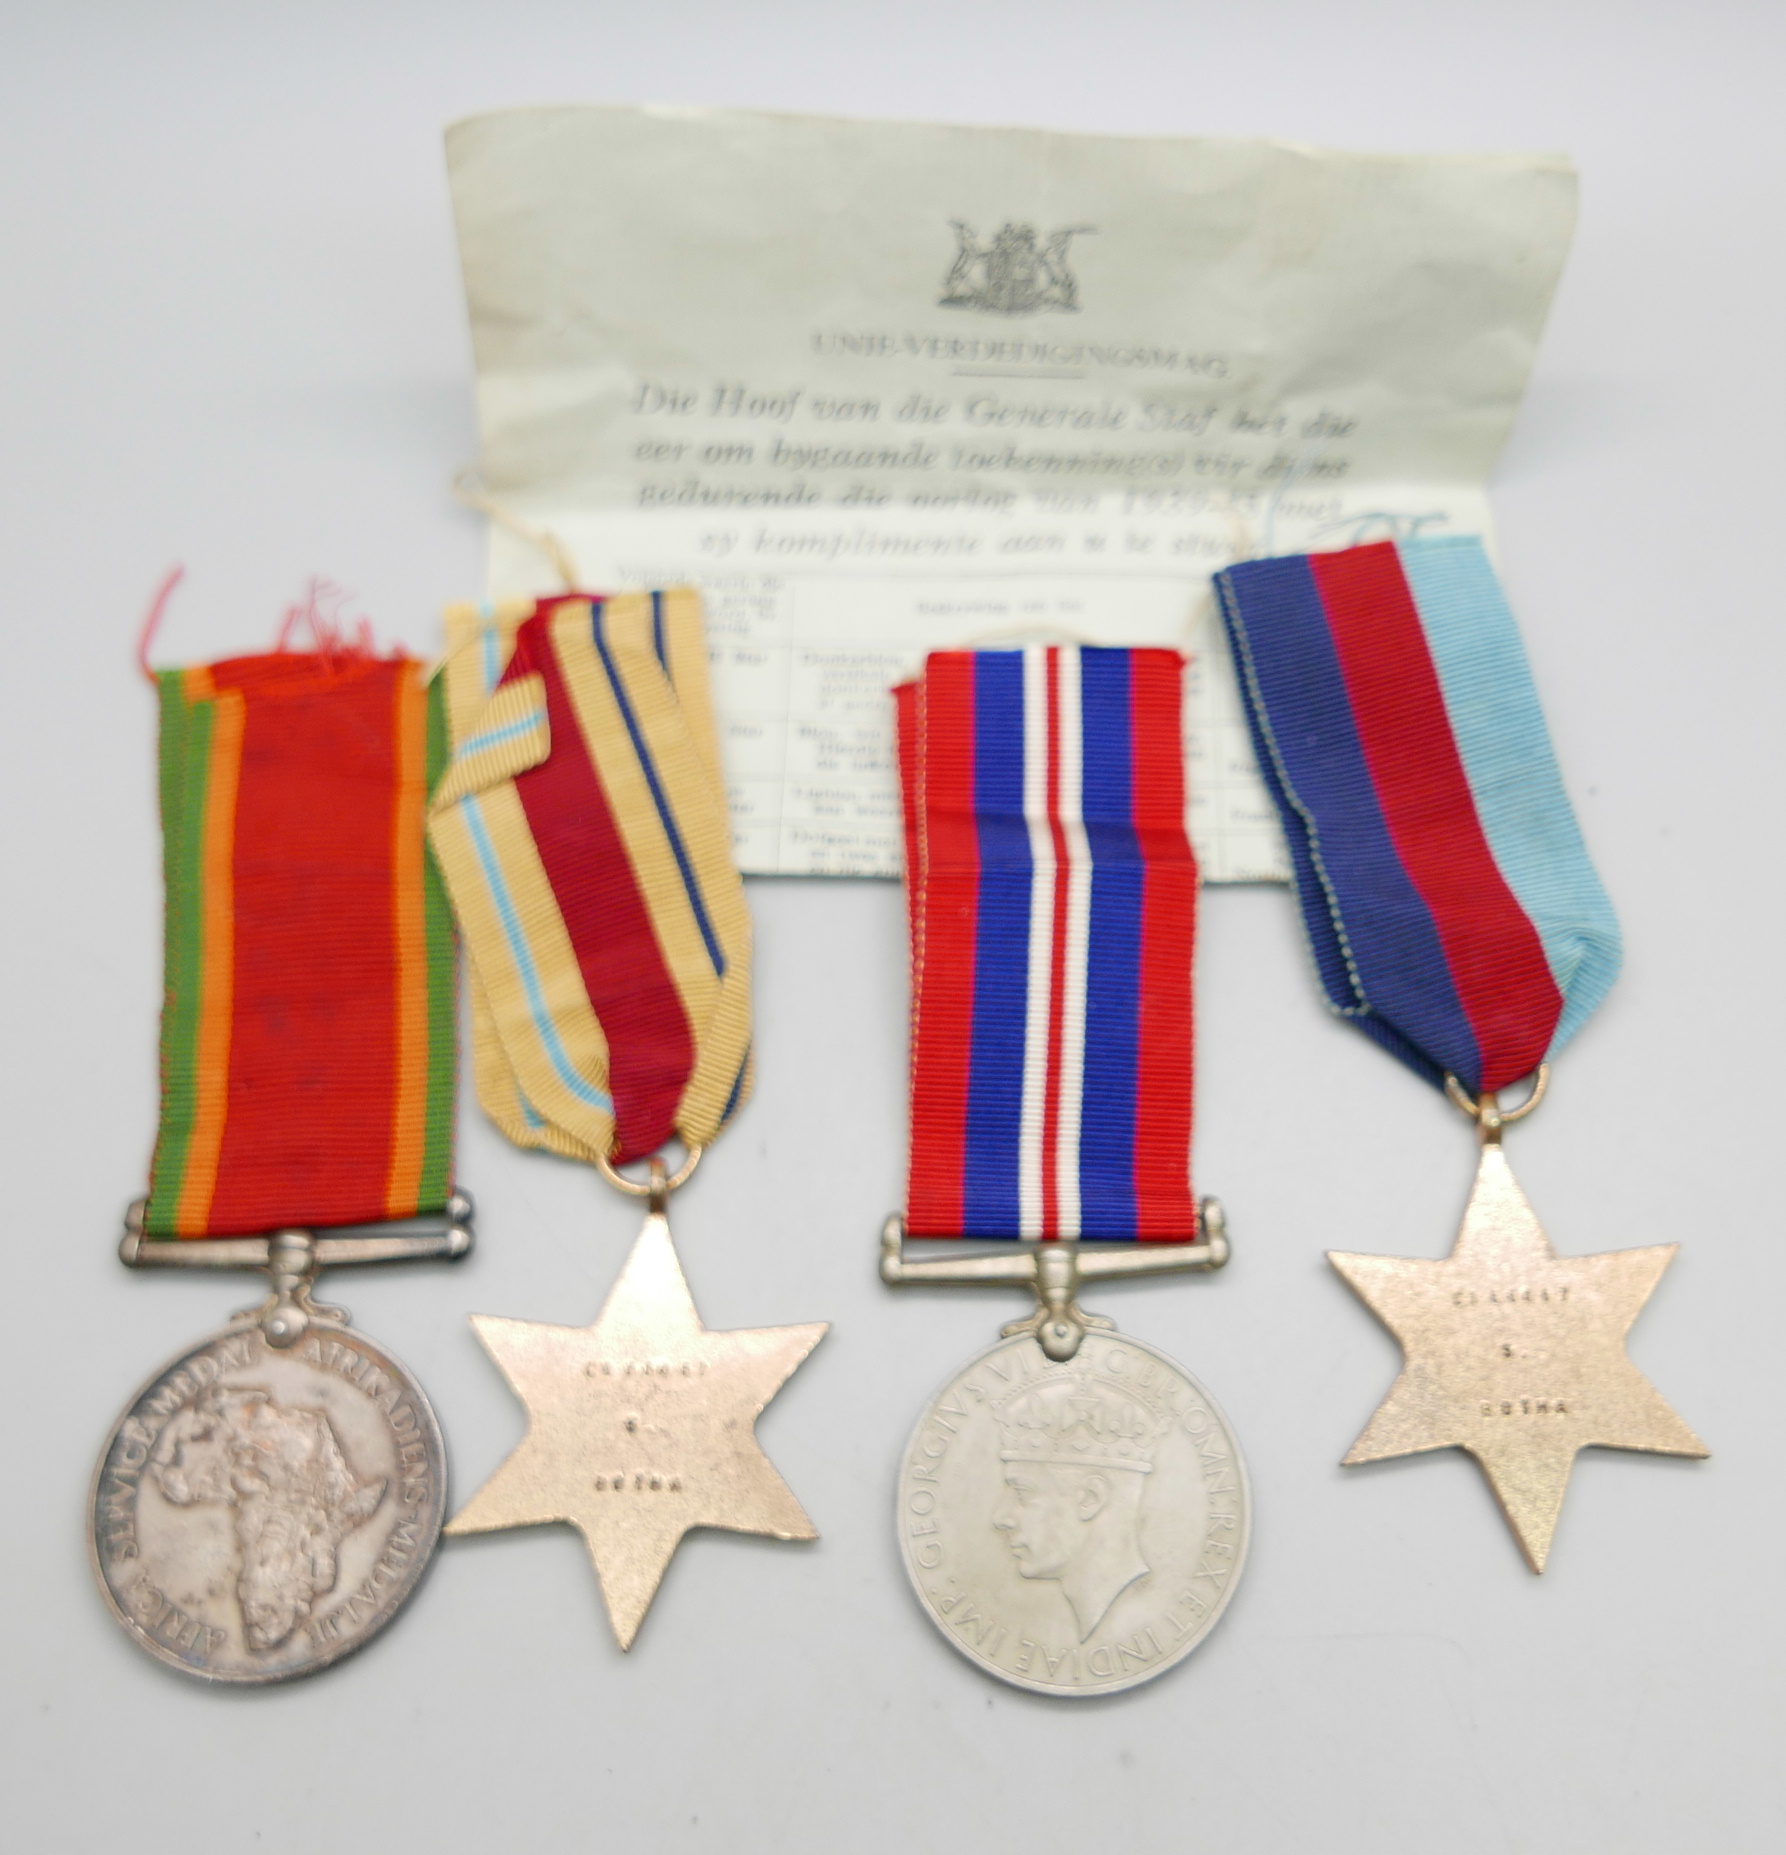 Four WWII medals including Africa Service Medal to C166467 S. Botha and leaflet - Image 2 of 4